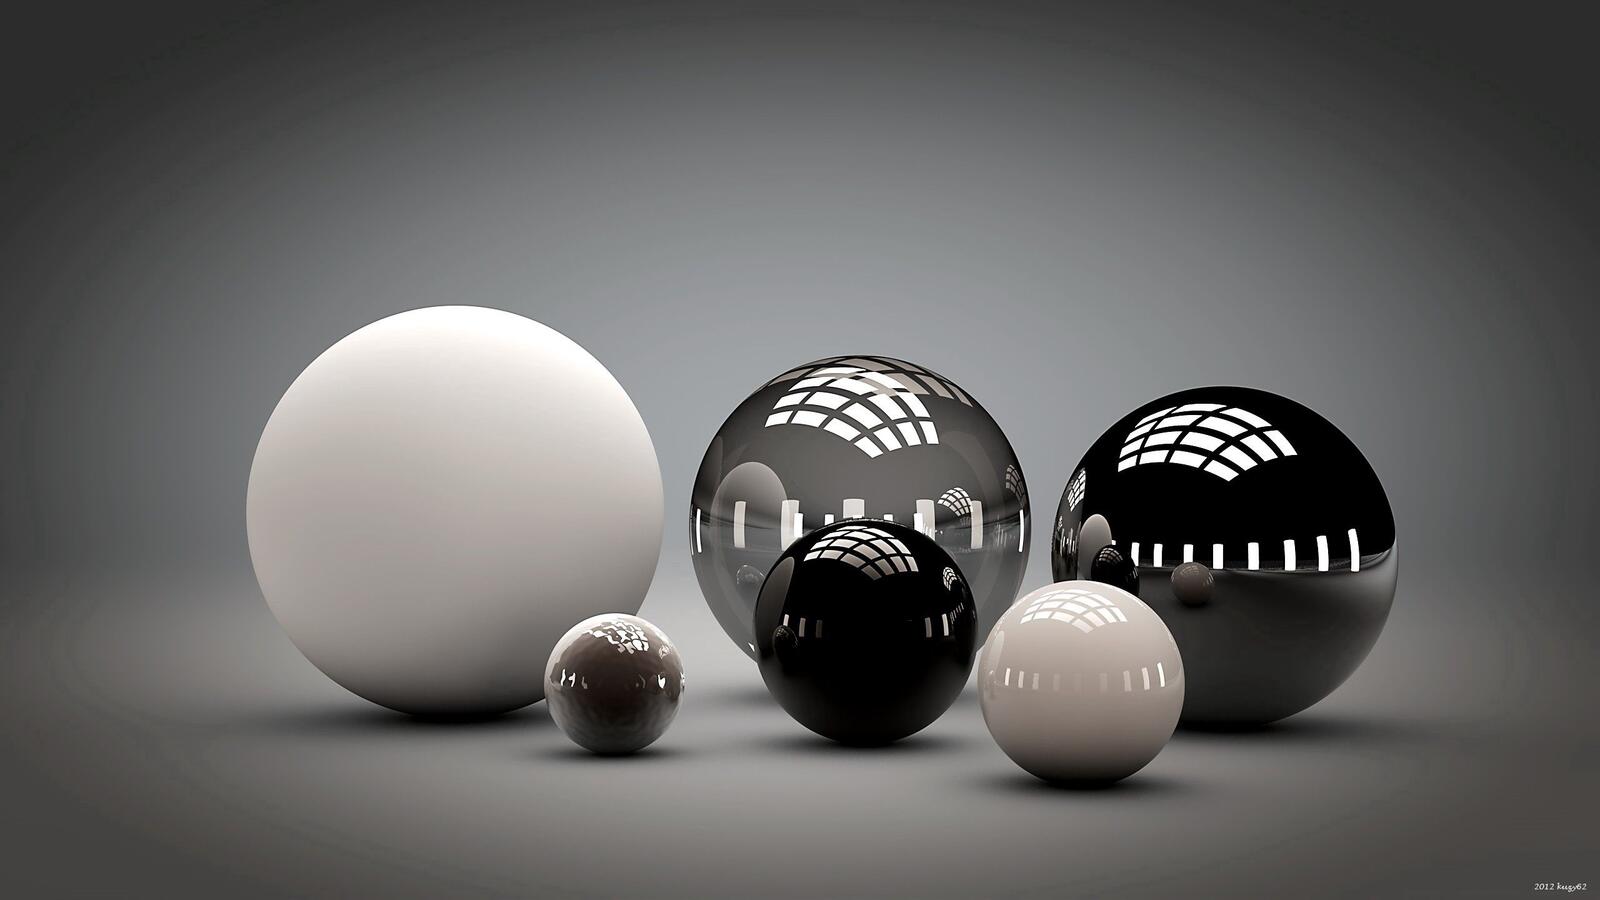 Wallpapers balloons balls black and white on the desktop